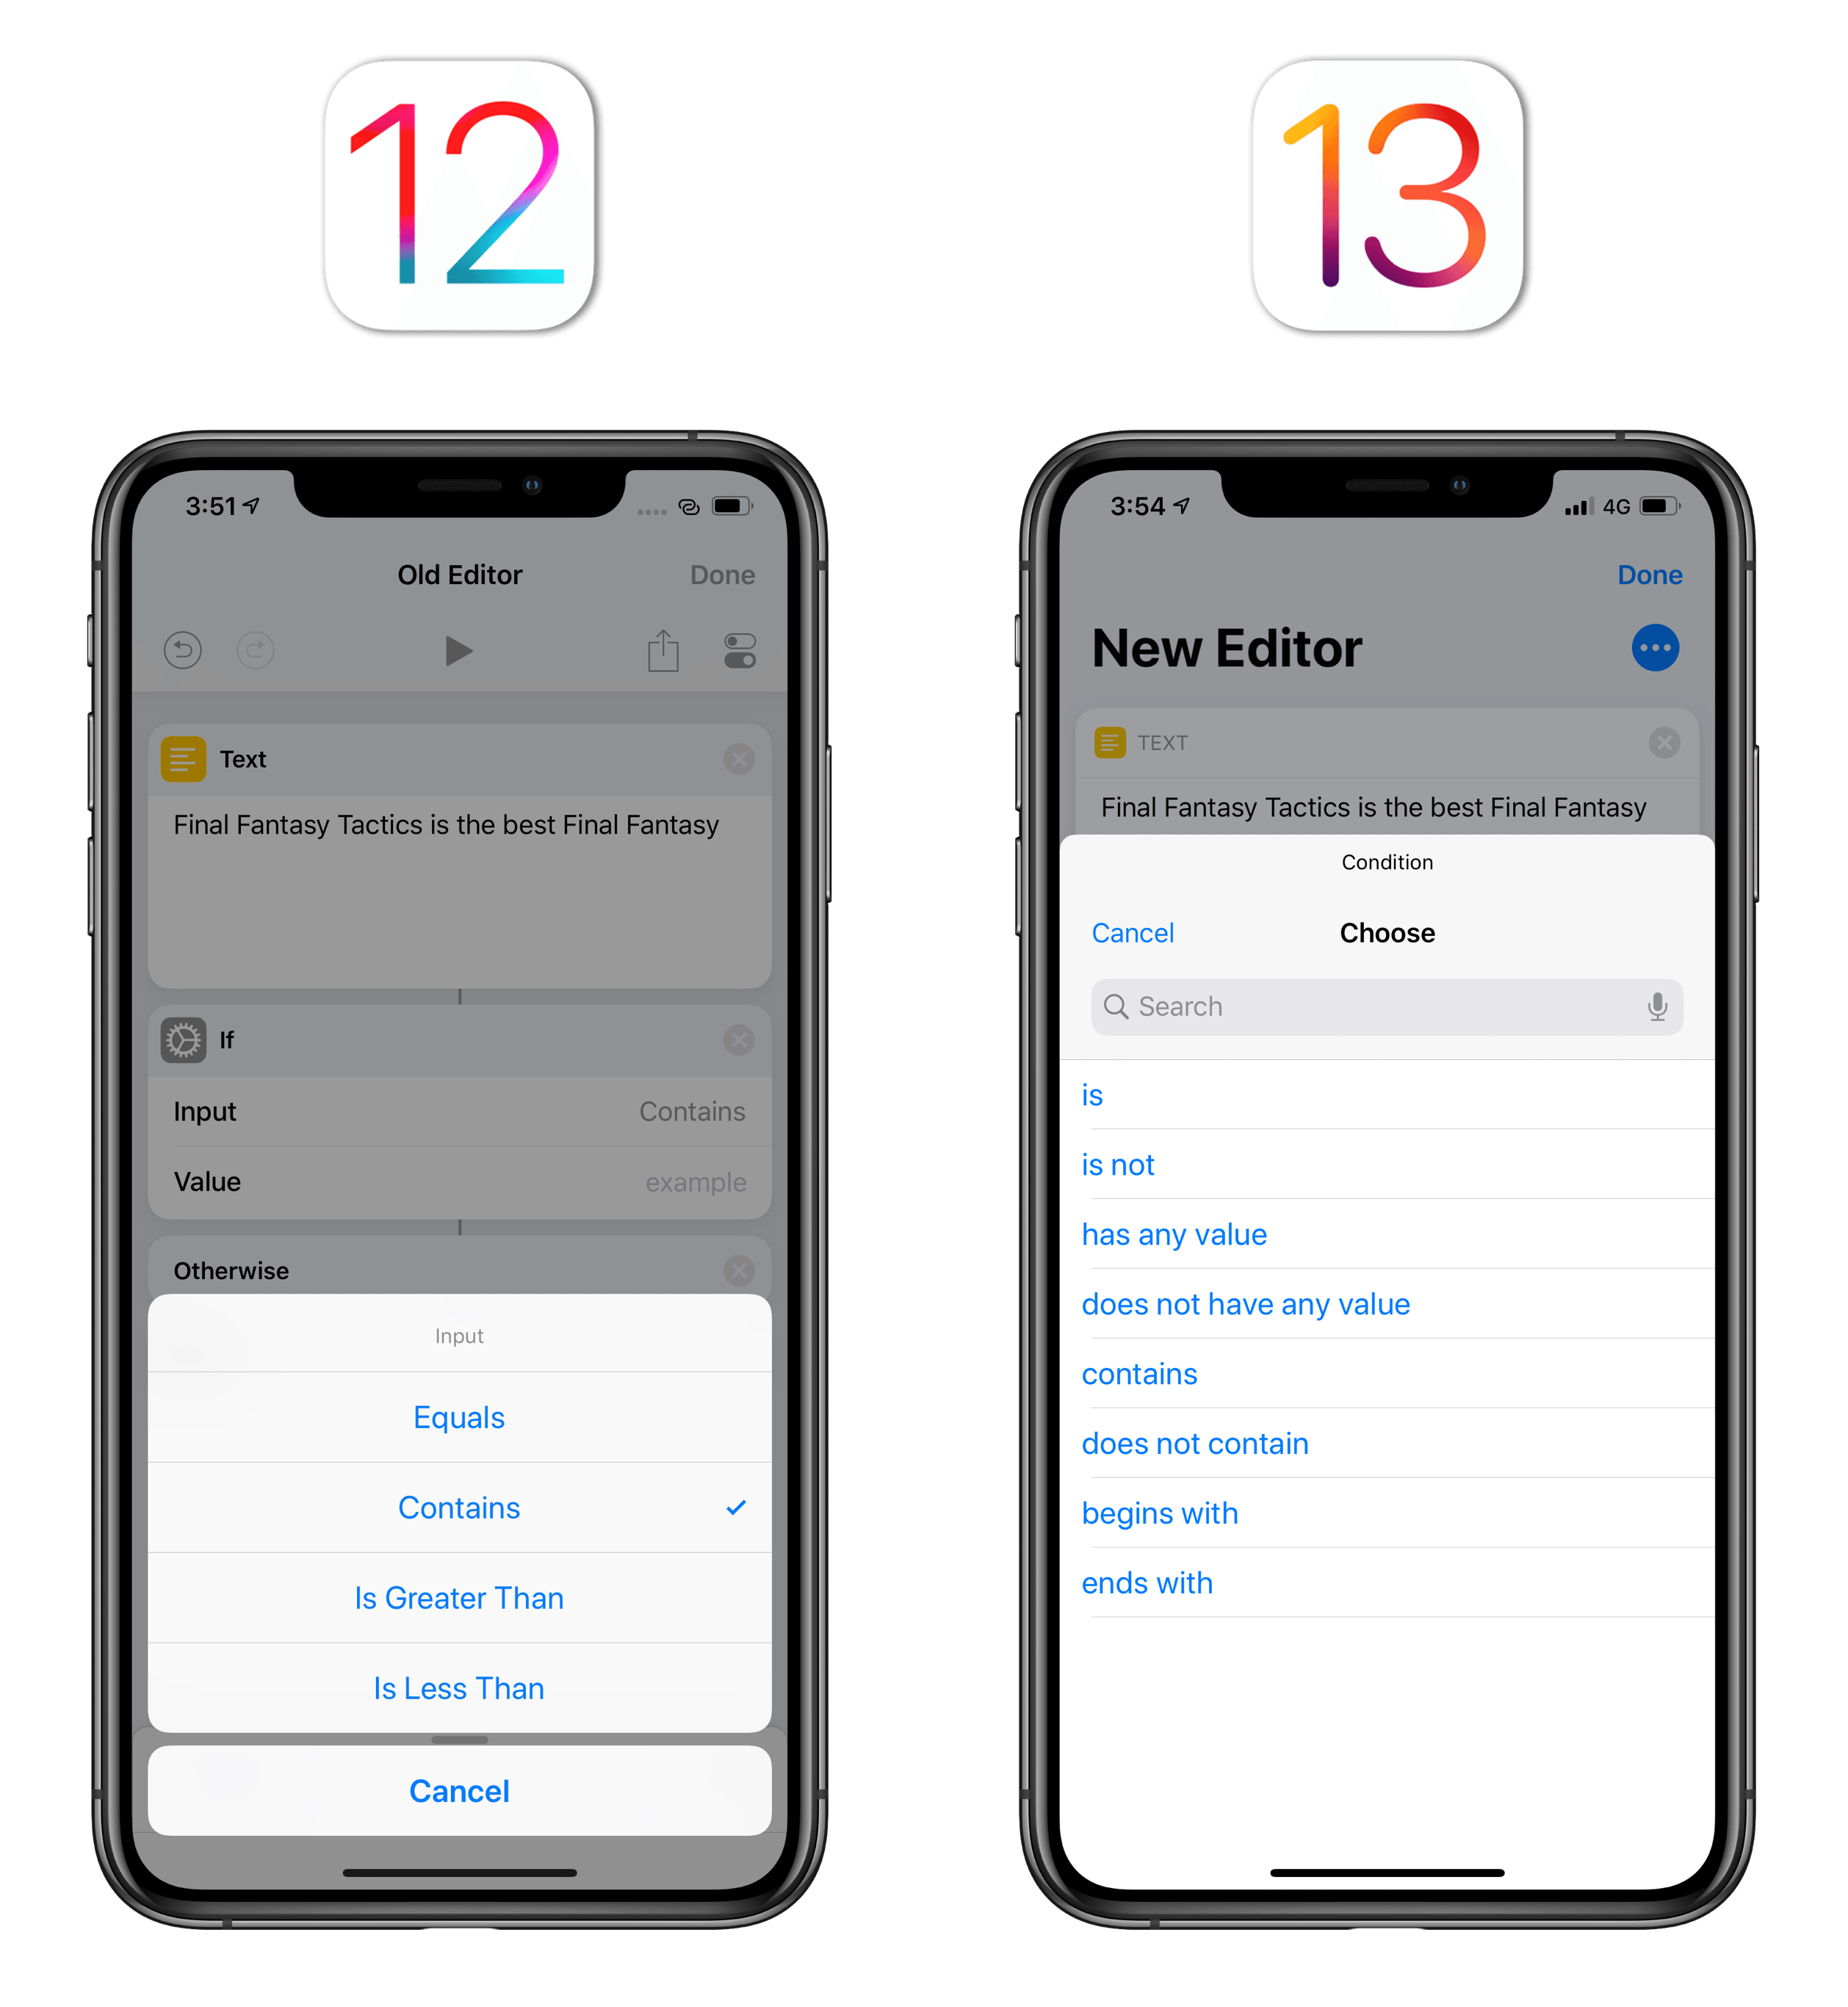 New conditions in iOS 13.